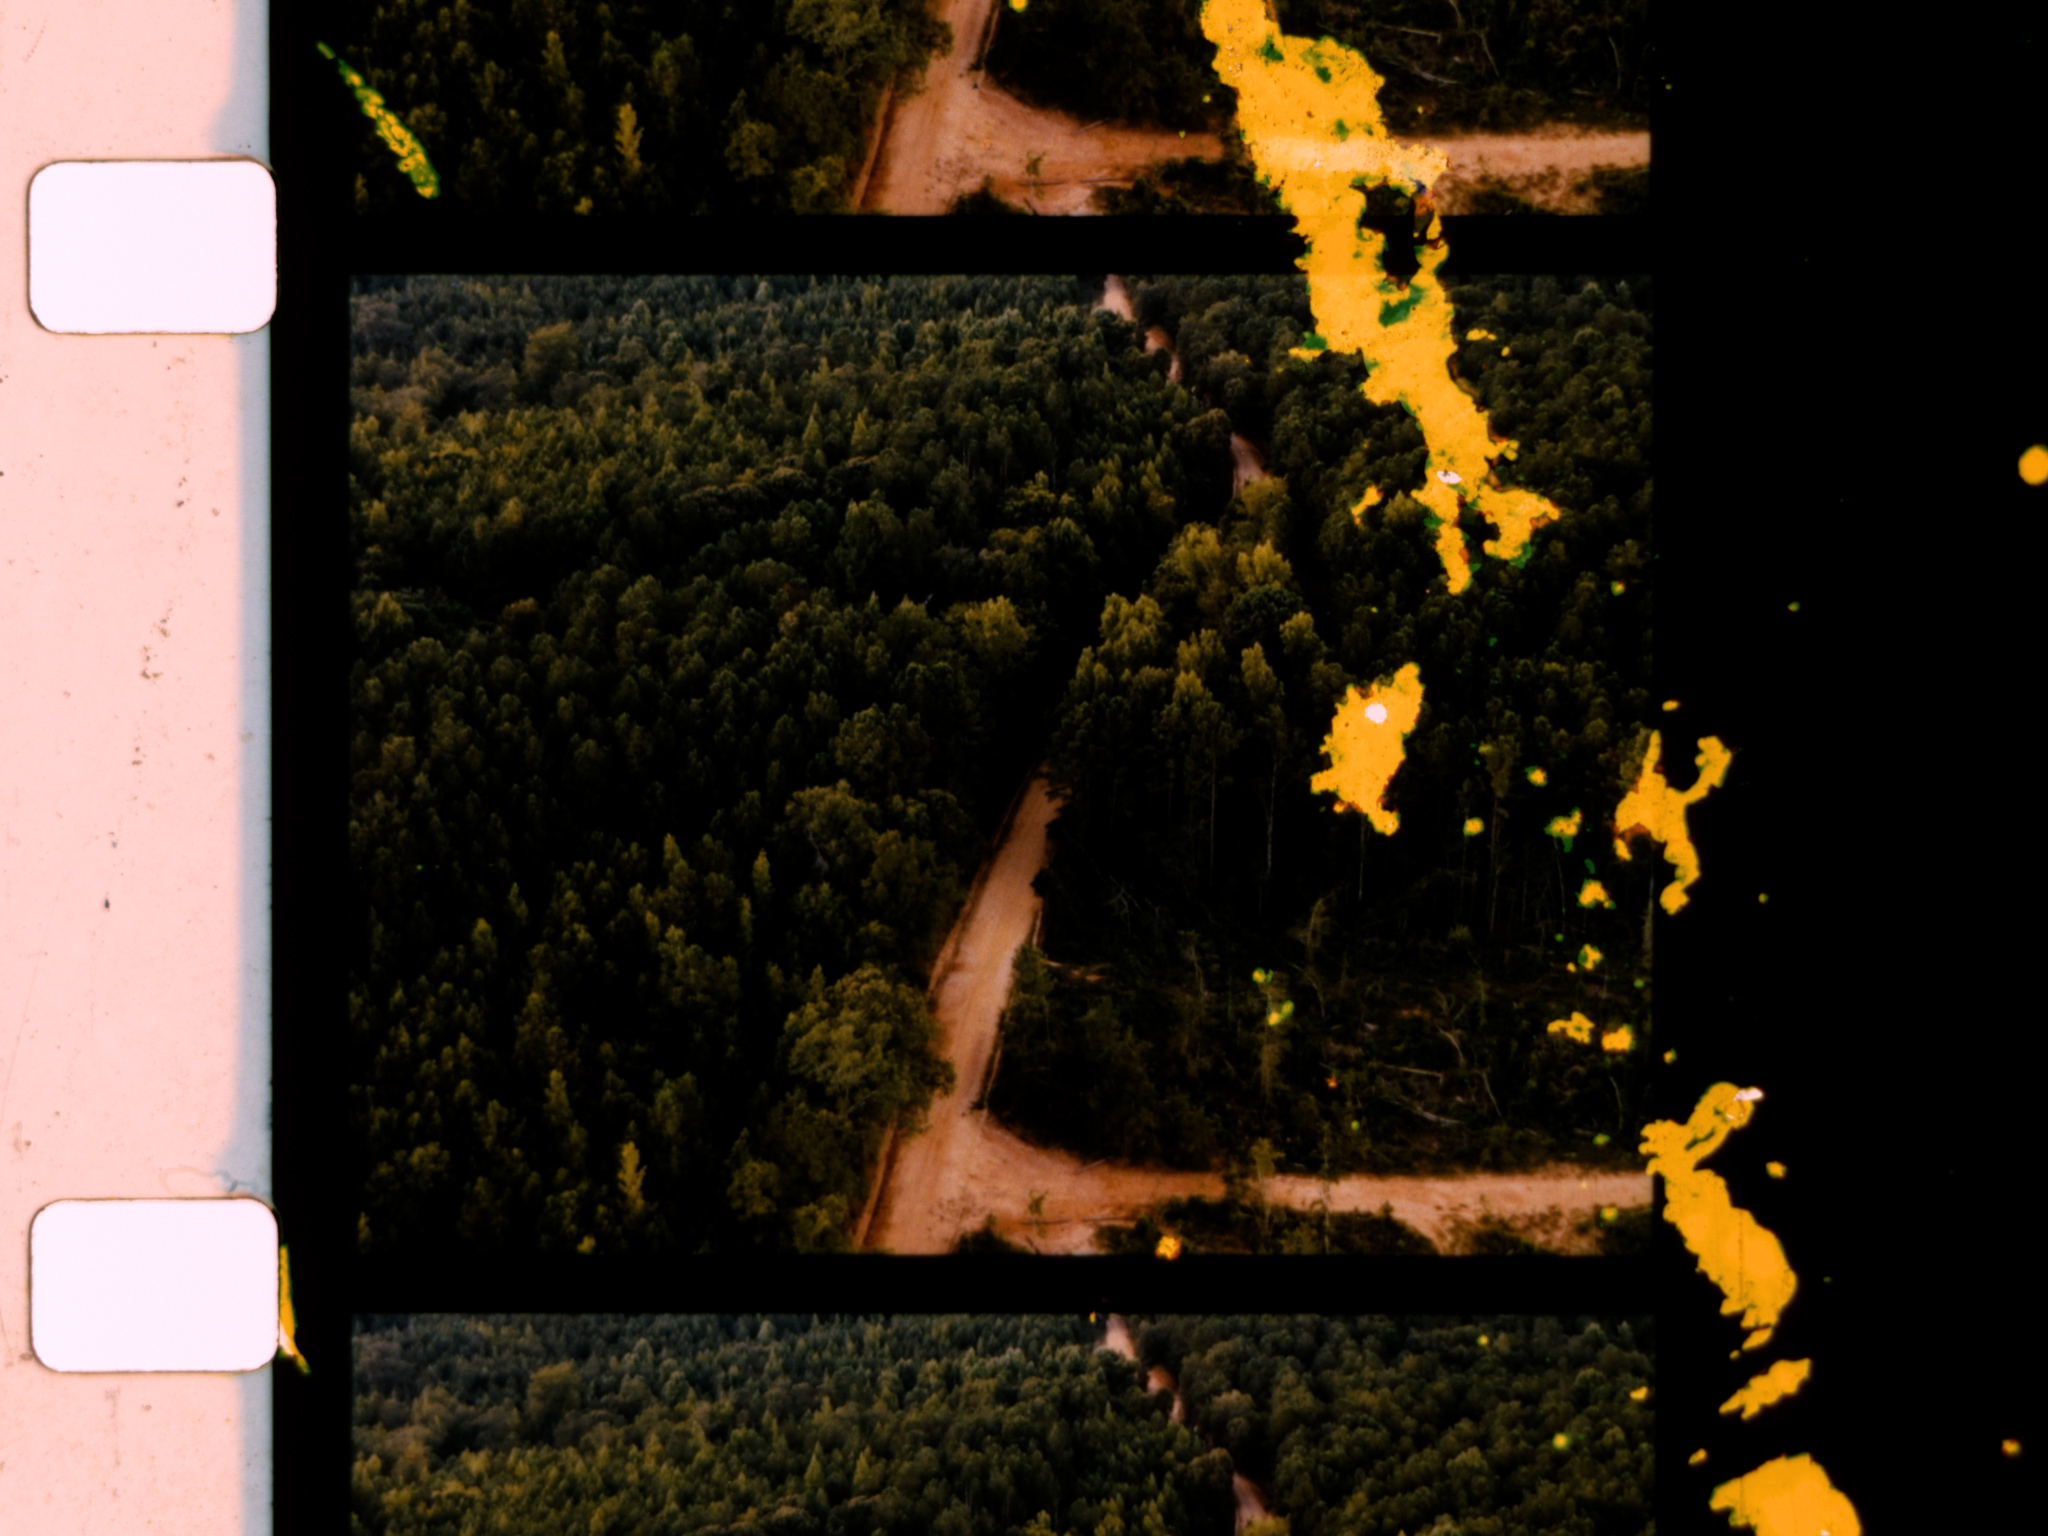 A distorted view of trees from above captured on a film strip with sprockets